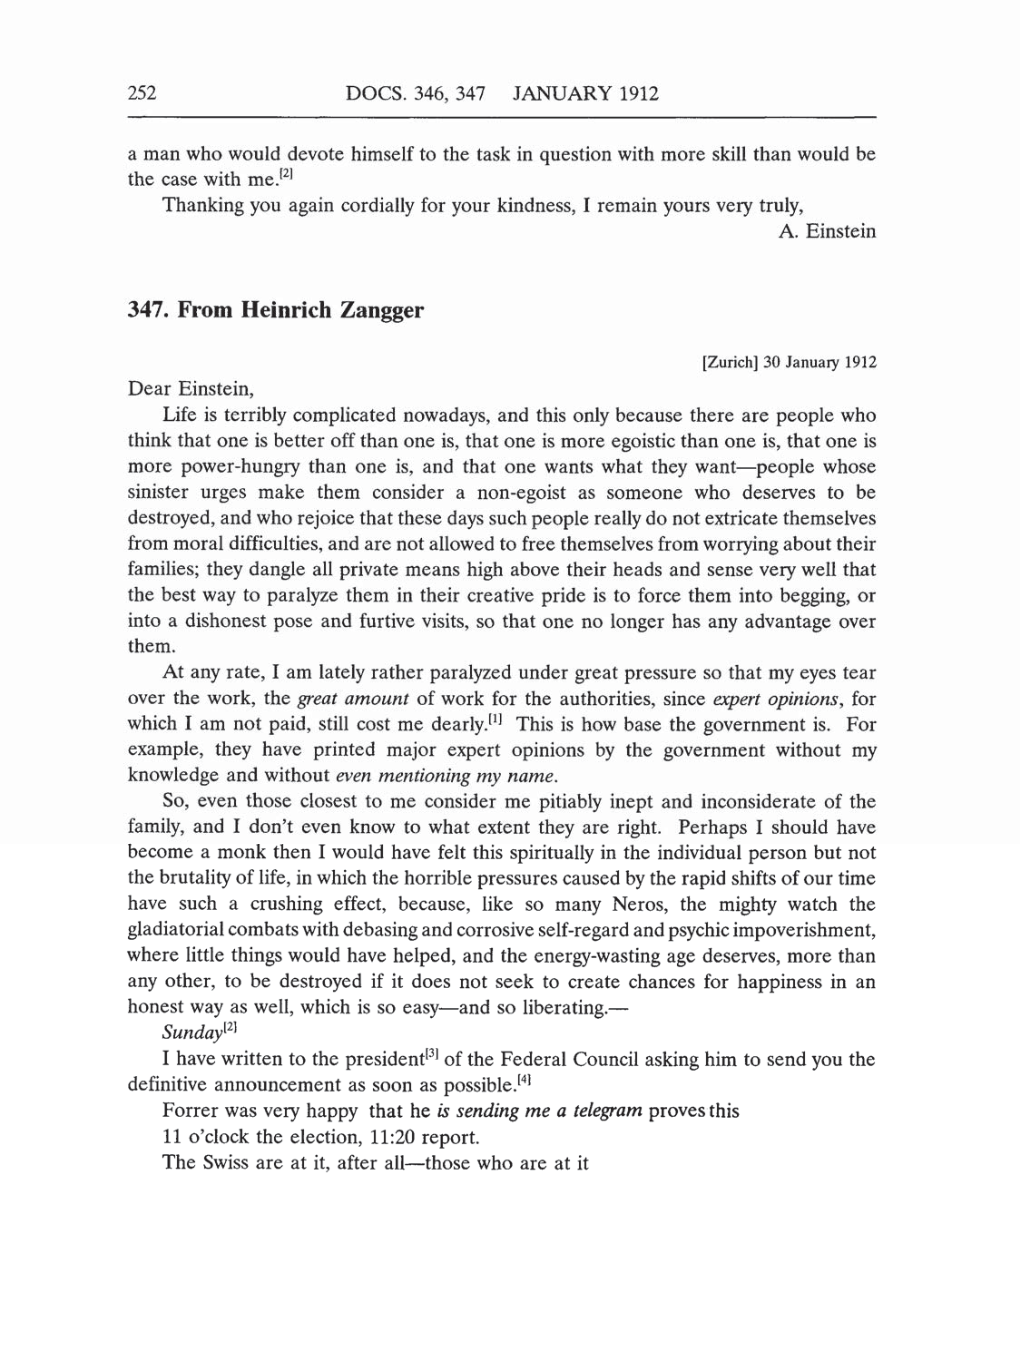 Volume 5: The Swiss Years: Correspondence, 1902-1914 (English translation supplement) page 252